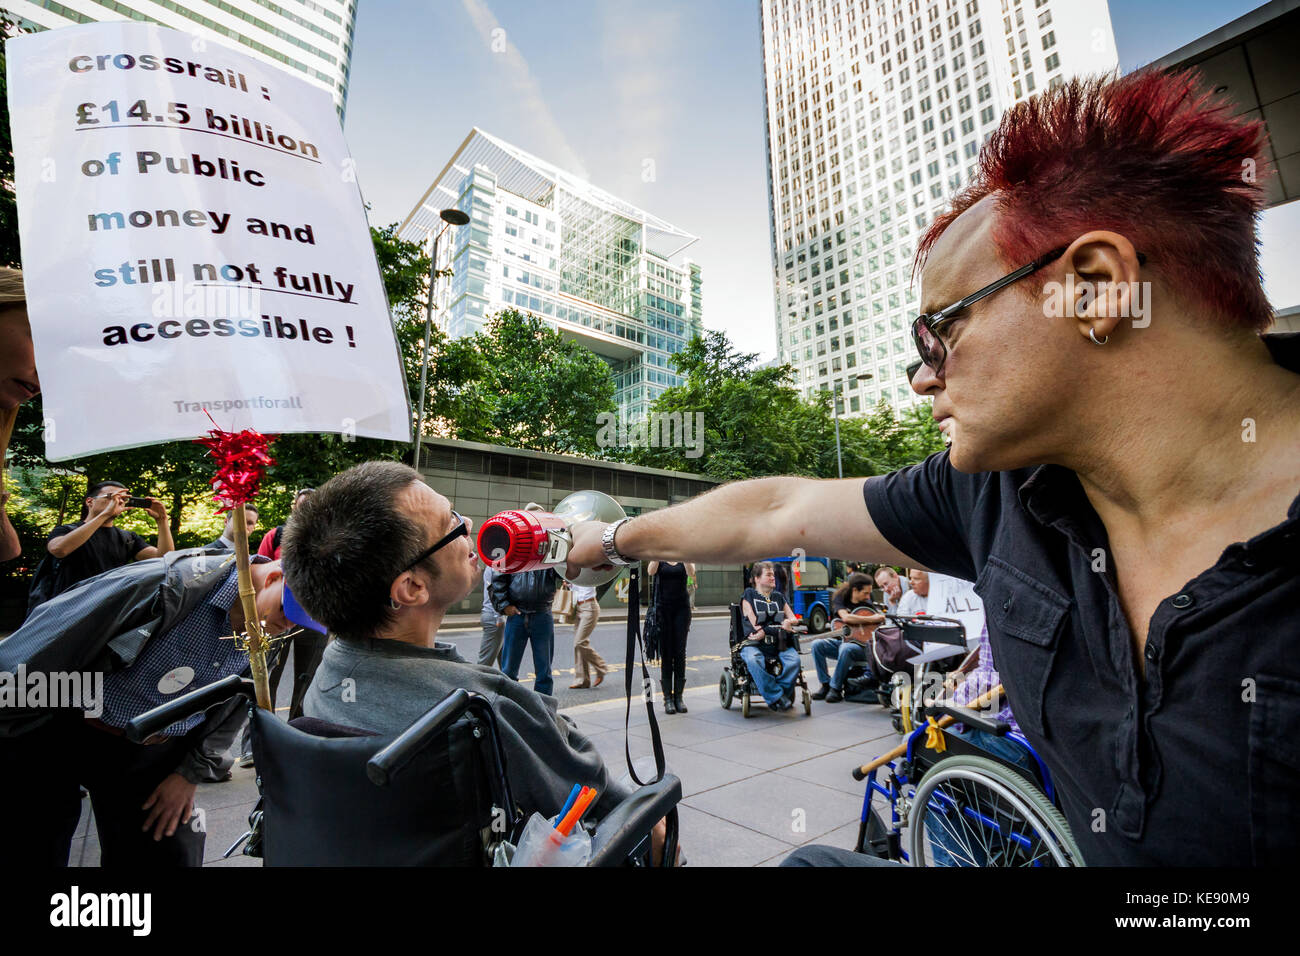 Disability campaigners protest outside the Crossrail head office building in Canary Wharf, London, UK. Stock Photo